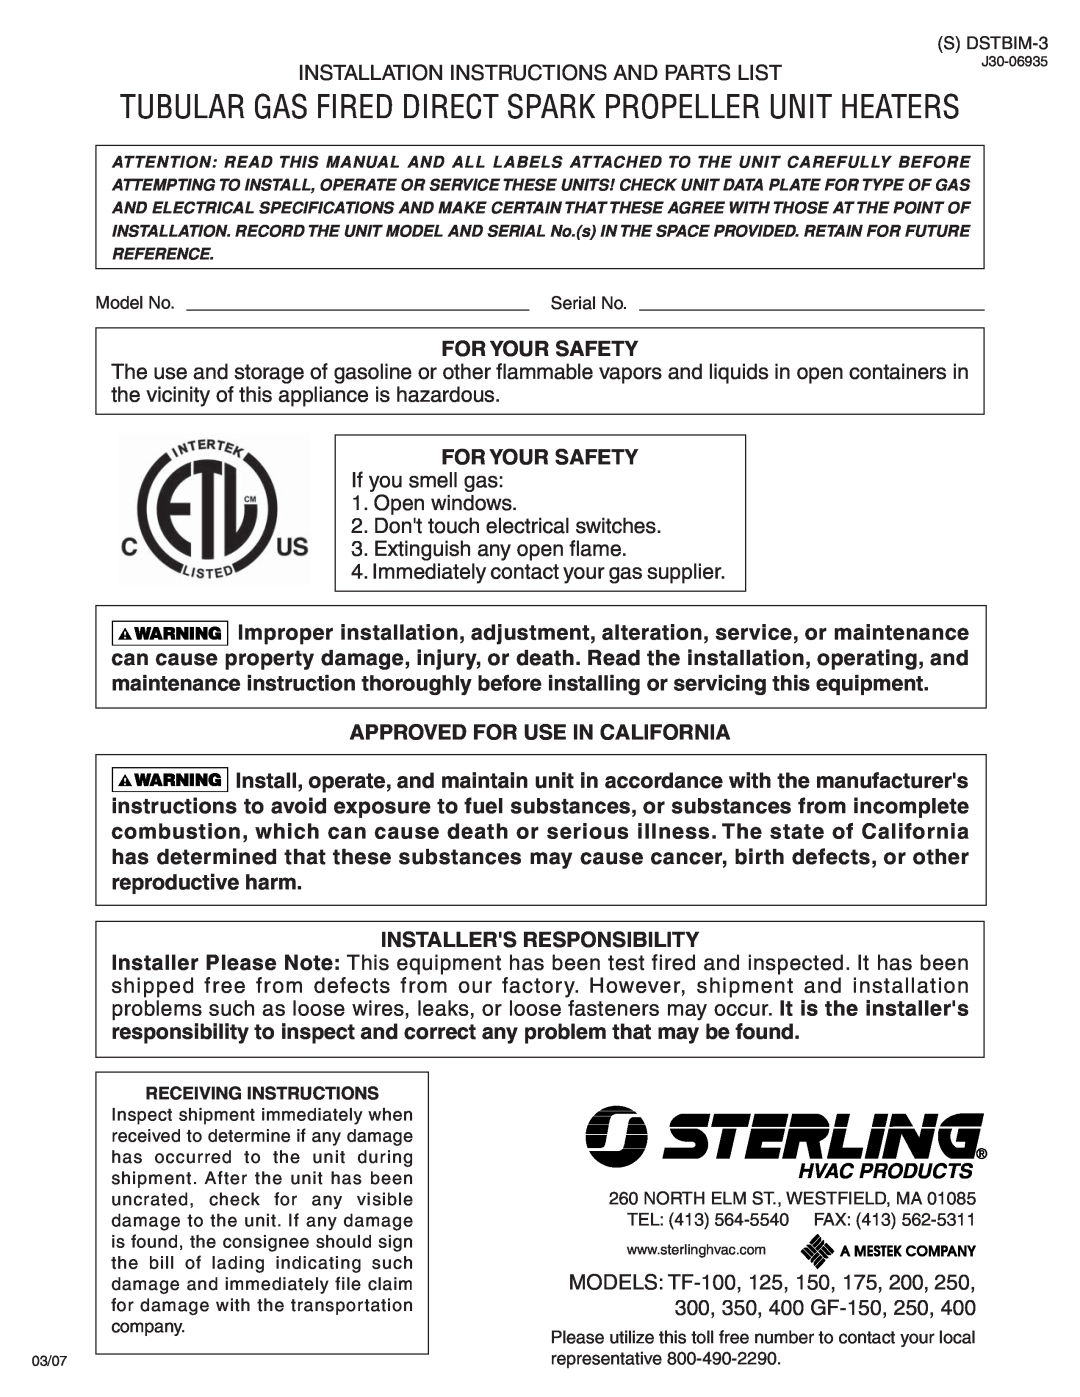 Sterling TF-150 installation instructions For Your Safety, Approved For Use In California, Installers Responsibility 